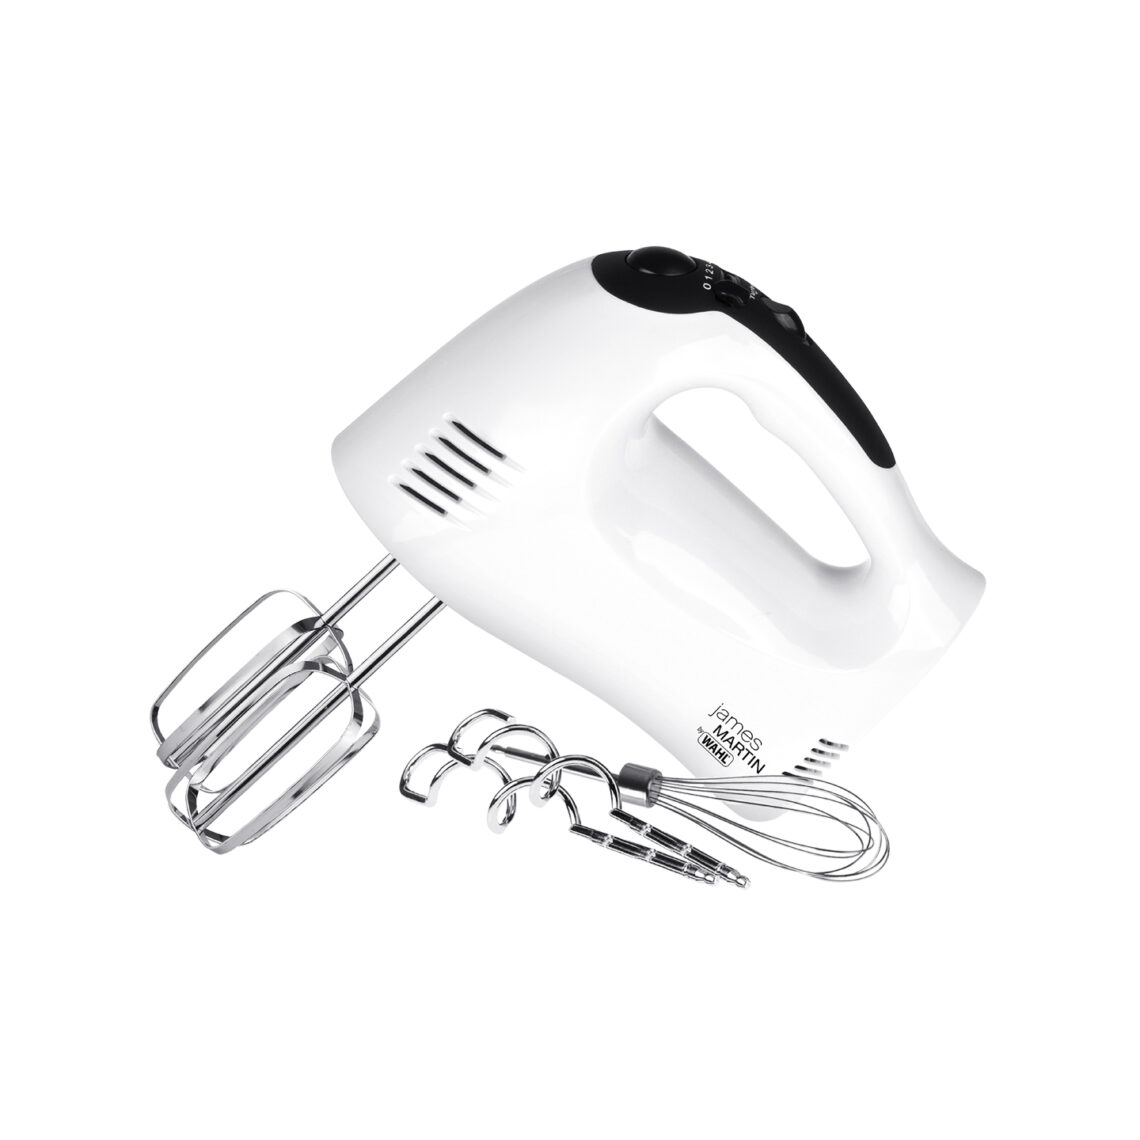 Meddele dinosaurus lide Hand Mixer | James Martin by Wahl | Hand Whisks & Electric Mixers | Wahl UK